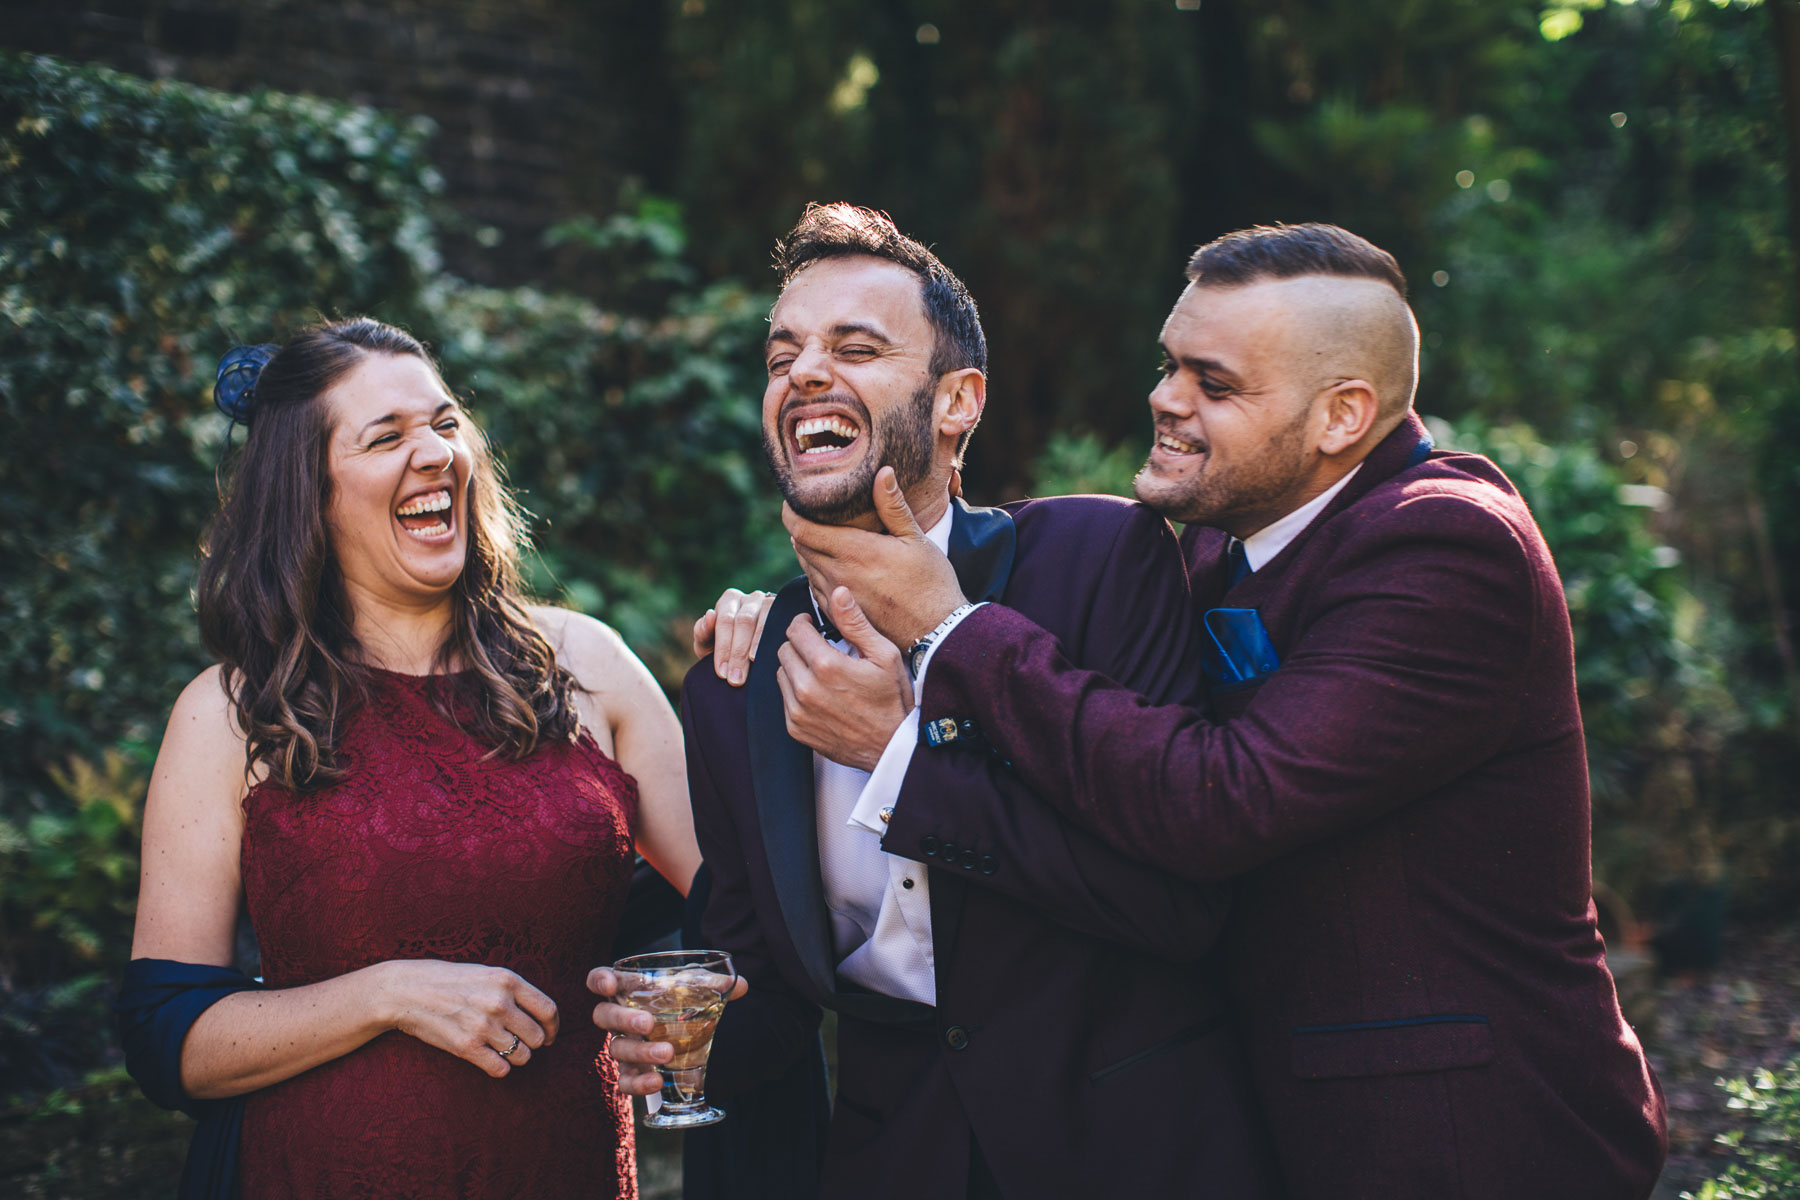 groomsmen and girls fall about laughing